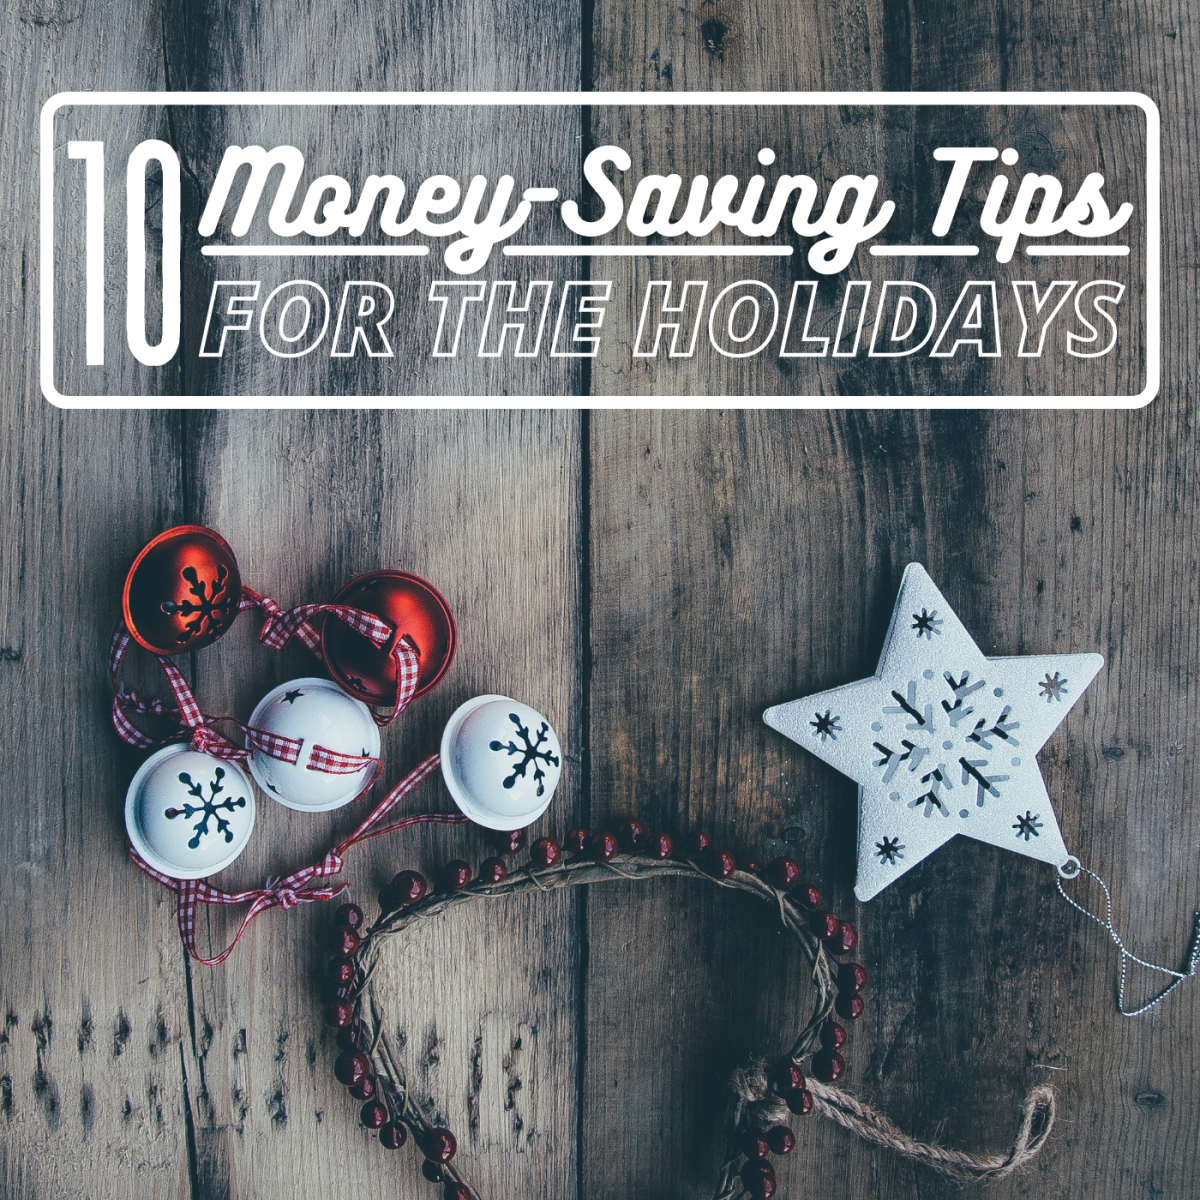 10 Ways to Save Money on Your Christmas Expenses This Year